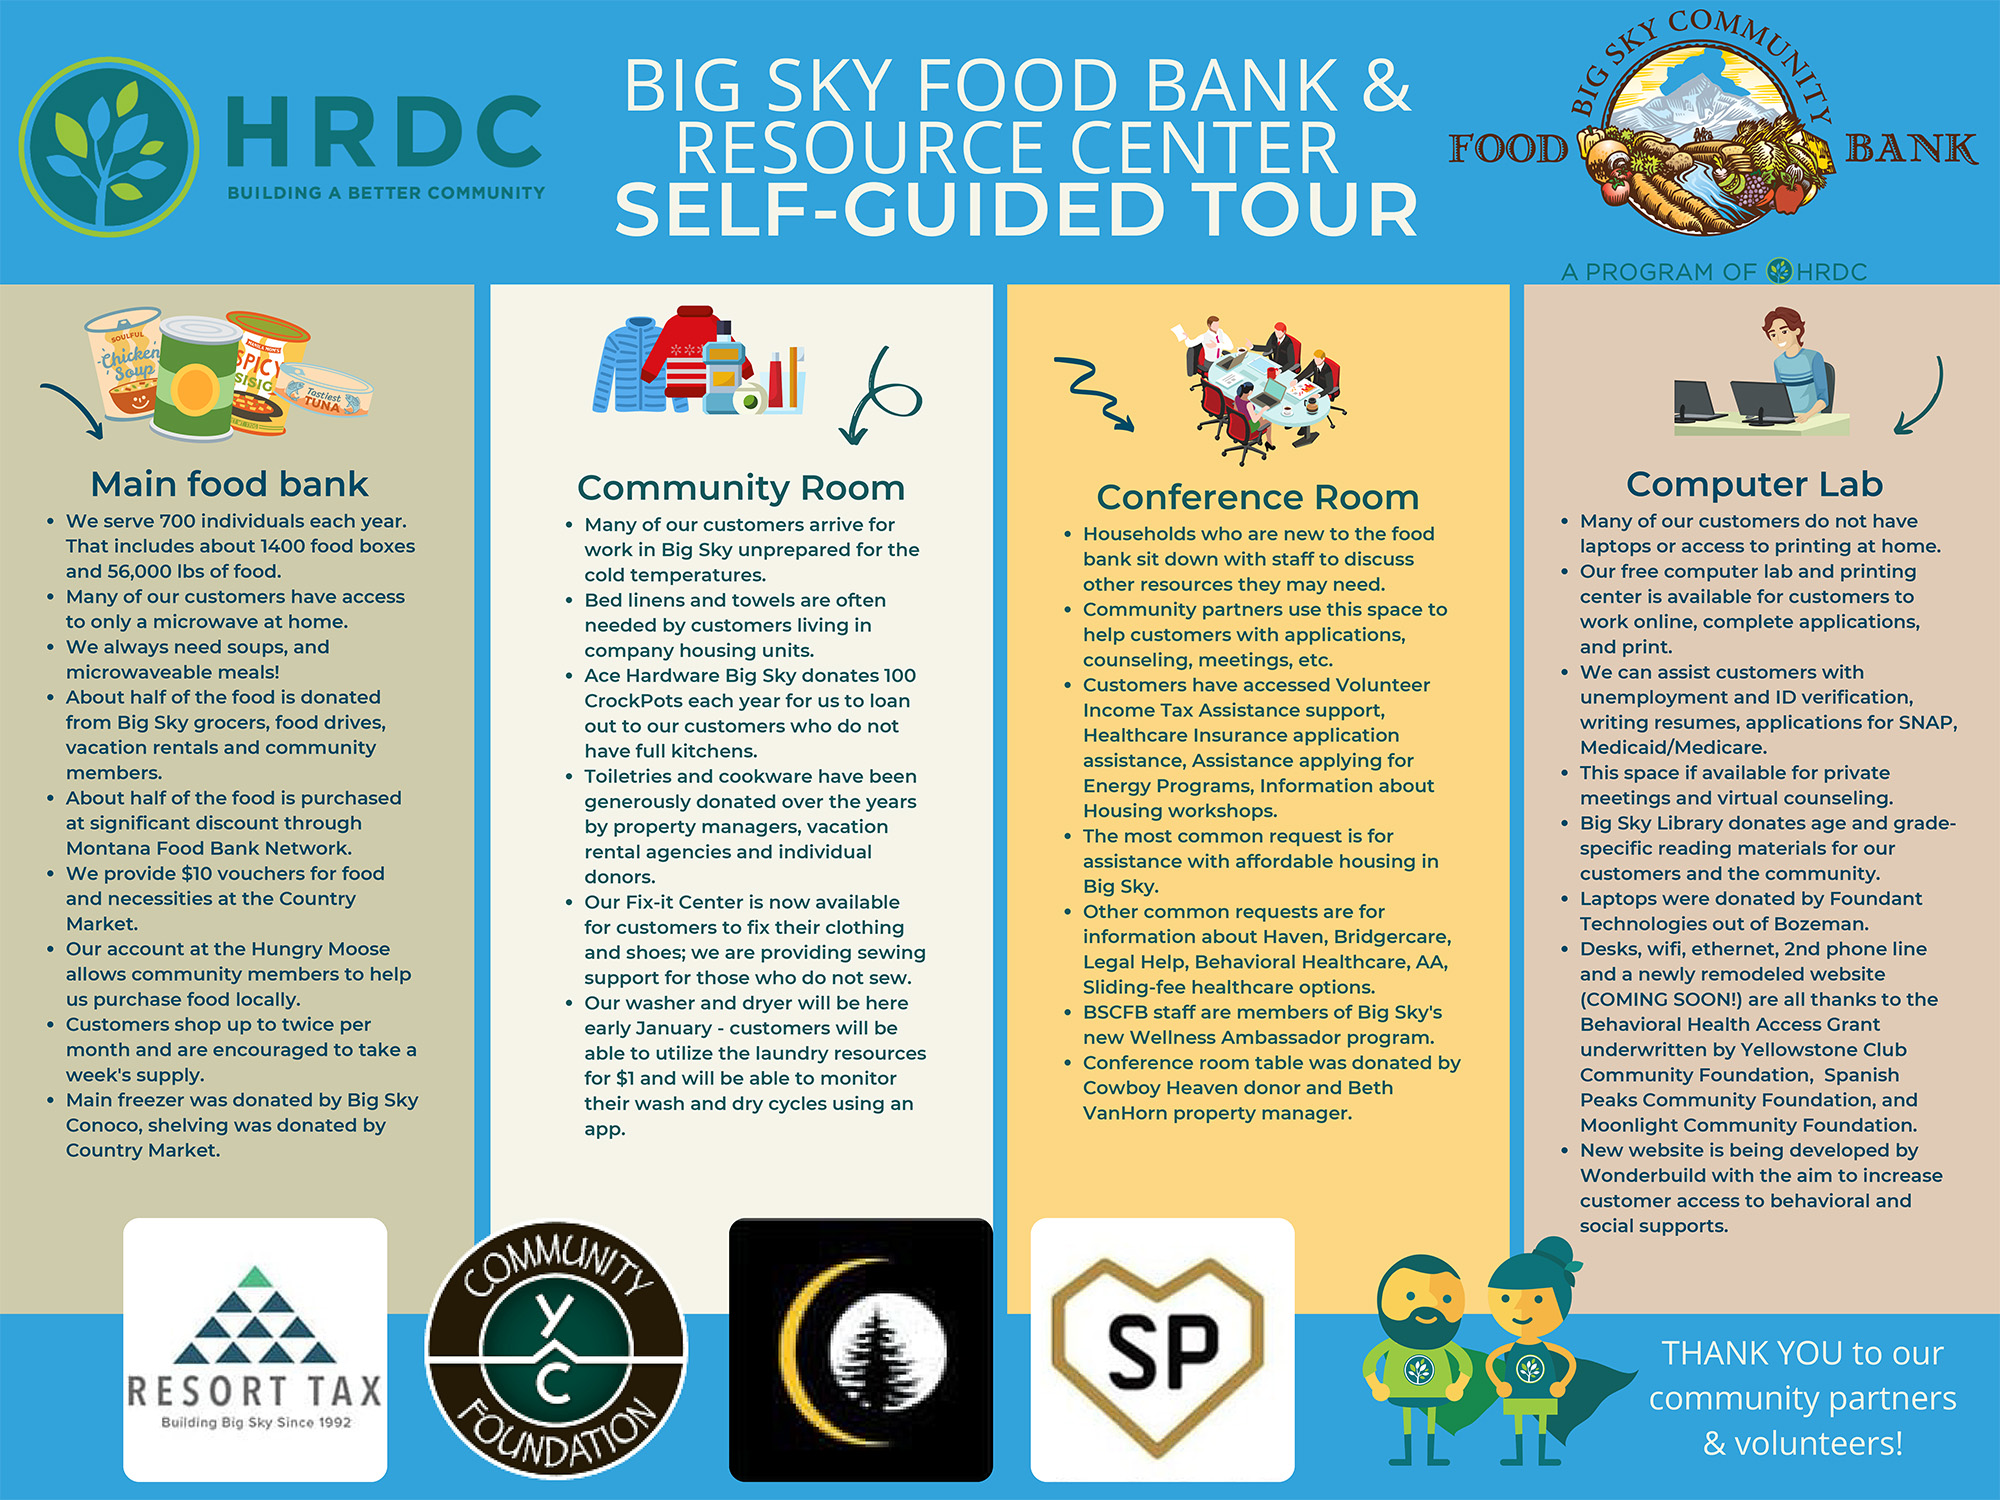 Image containing written information about the resources available at the food bank, including the Main Food Bank, the Community Room, the Conference Room, and the Computer Lab